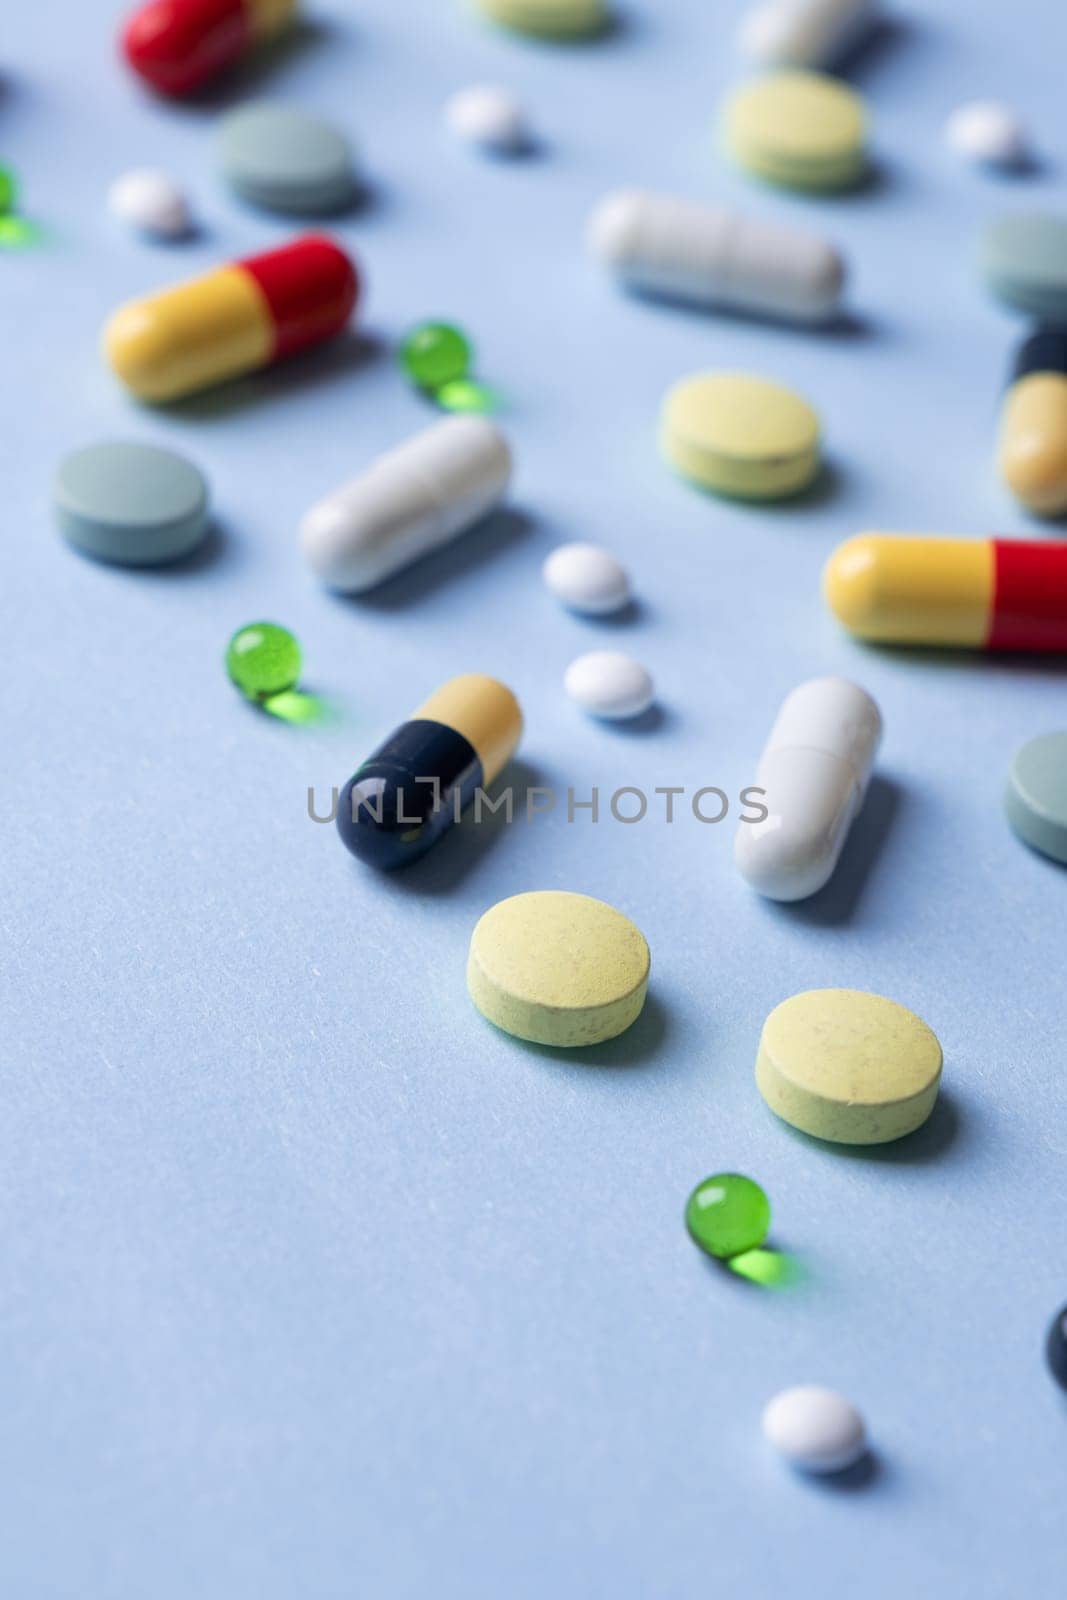 Different pills on color blue background, flat lay